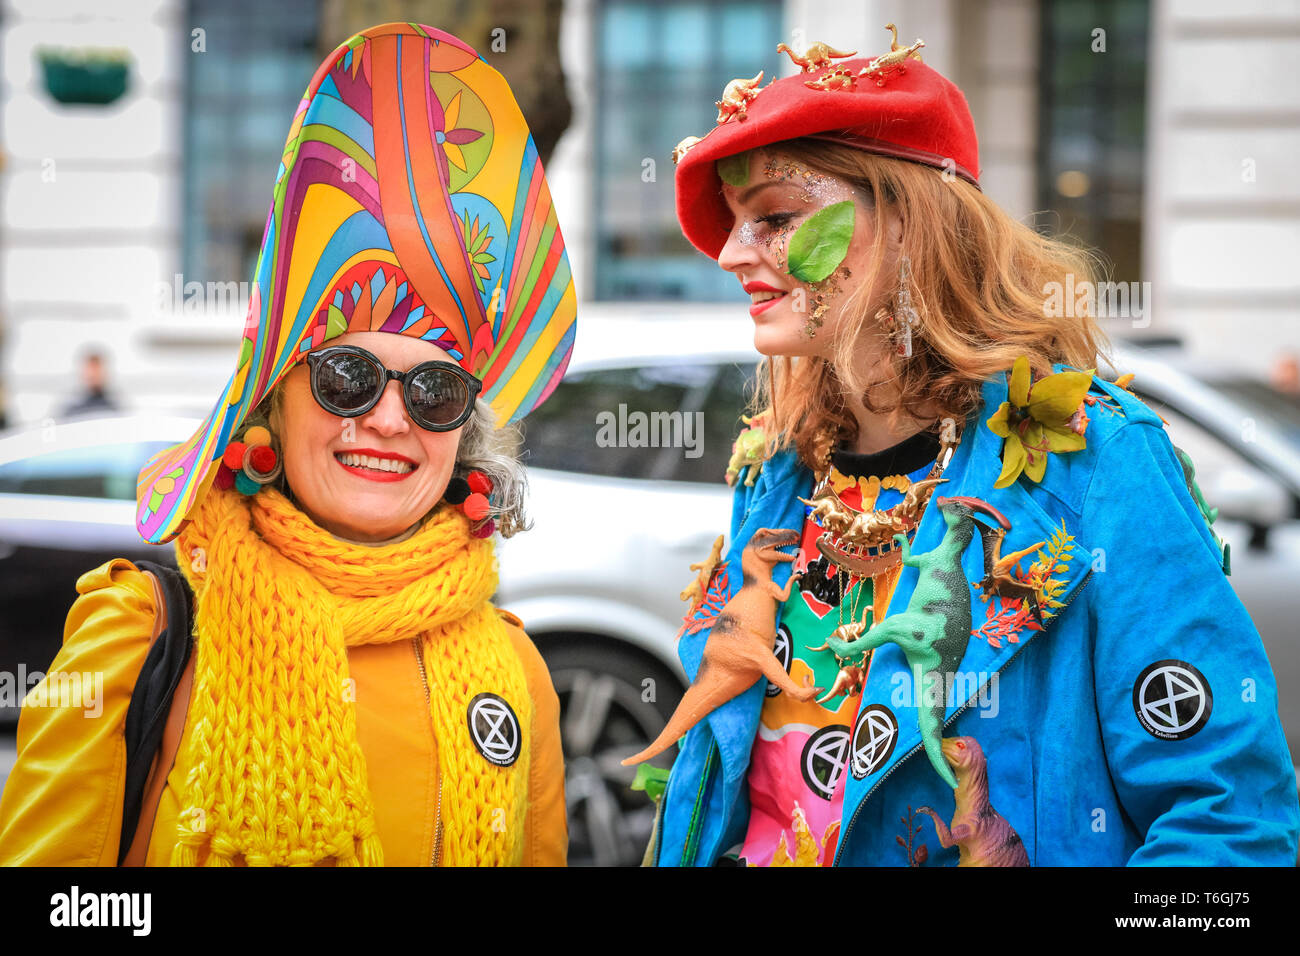 London, UK. 1st May, 2019. Protesters have turned up in fashionable, bright outfits. Extinction Rebellion have organised a 'Carnival of Chaos' outside the Brazilian Embasssy in central London. The protest is to highlight XR's 'solidarity with the people of Brazil, joining the fight to defend the planet's ecosystem' and is attended by several figures from the fashion industry. Credit: Imageplotter/Alamy Live News Stock Photo